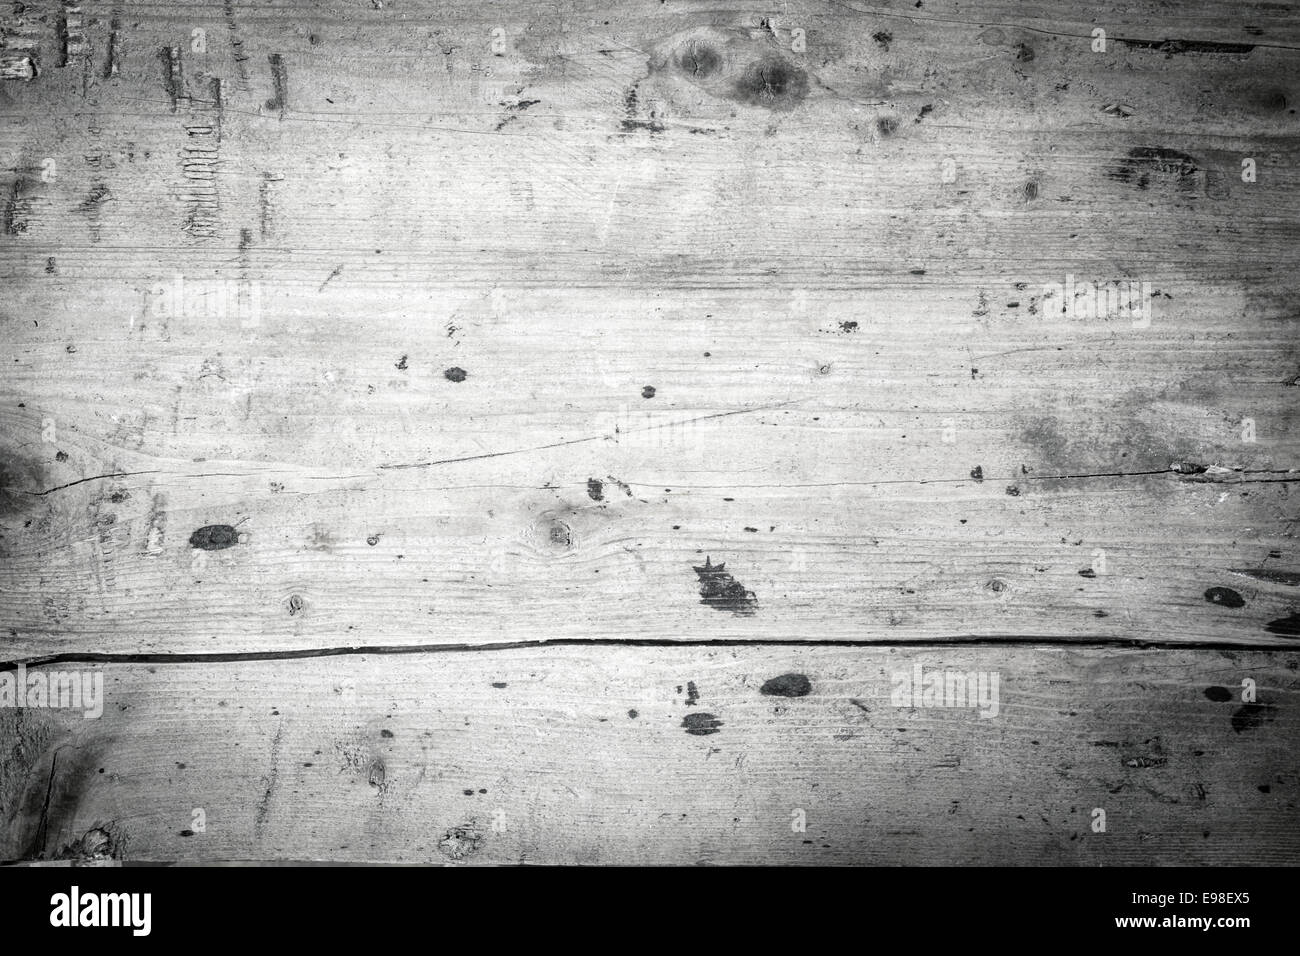 Monochrome greyscale background of old wooden boards with a smooth texture, stain spots, a large crack and corner vignette Stock Photo